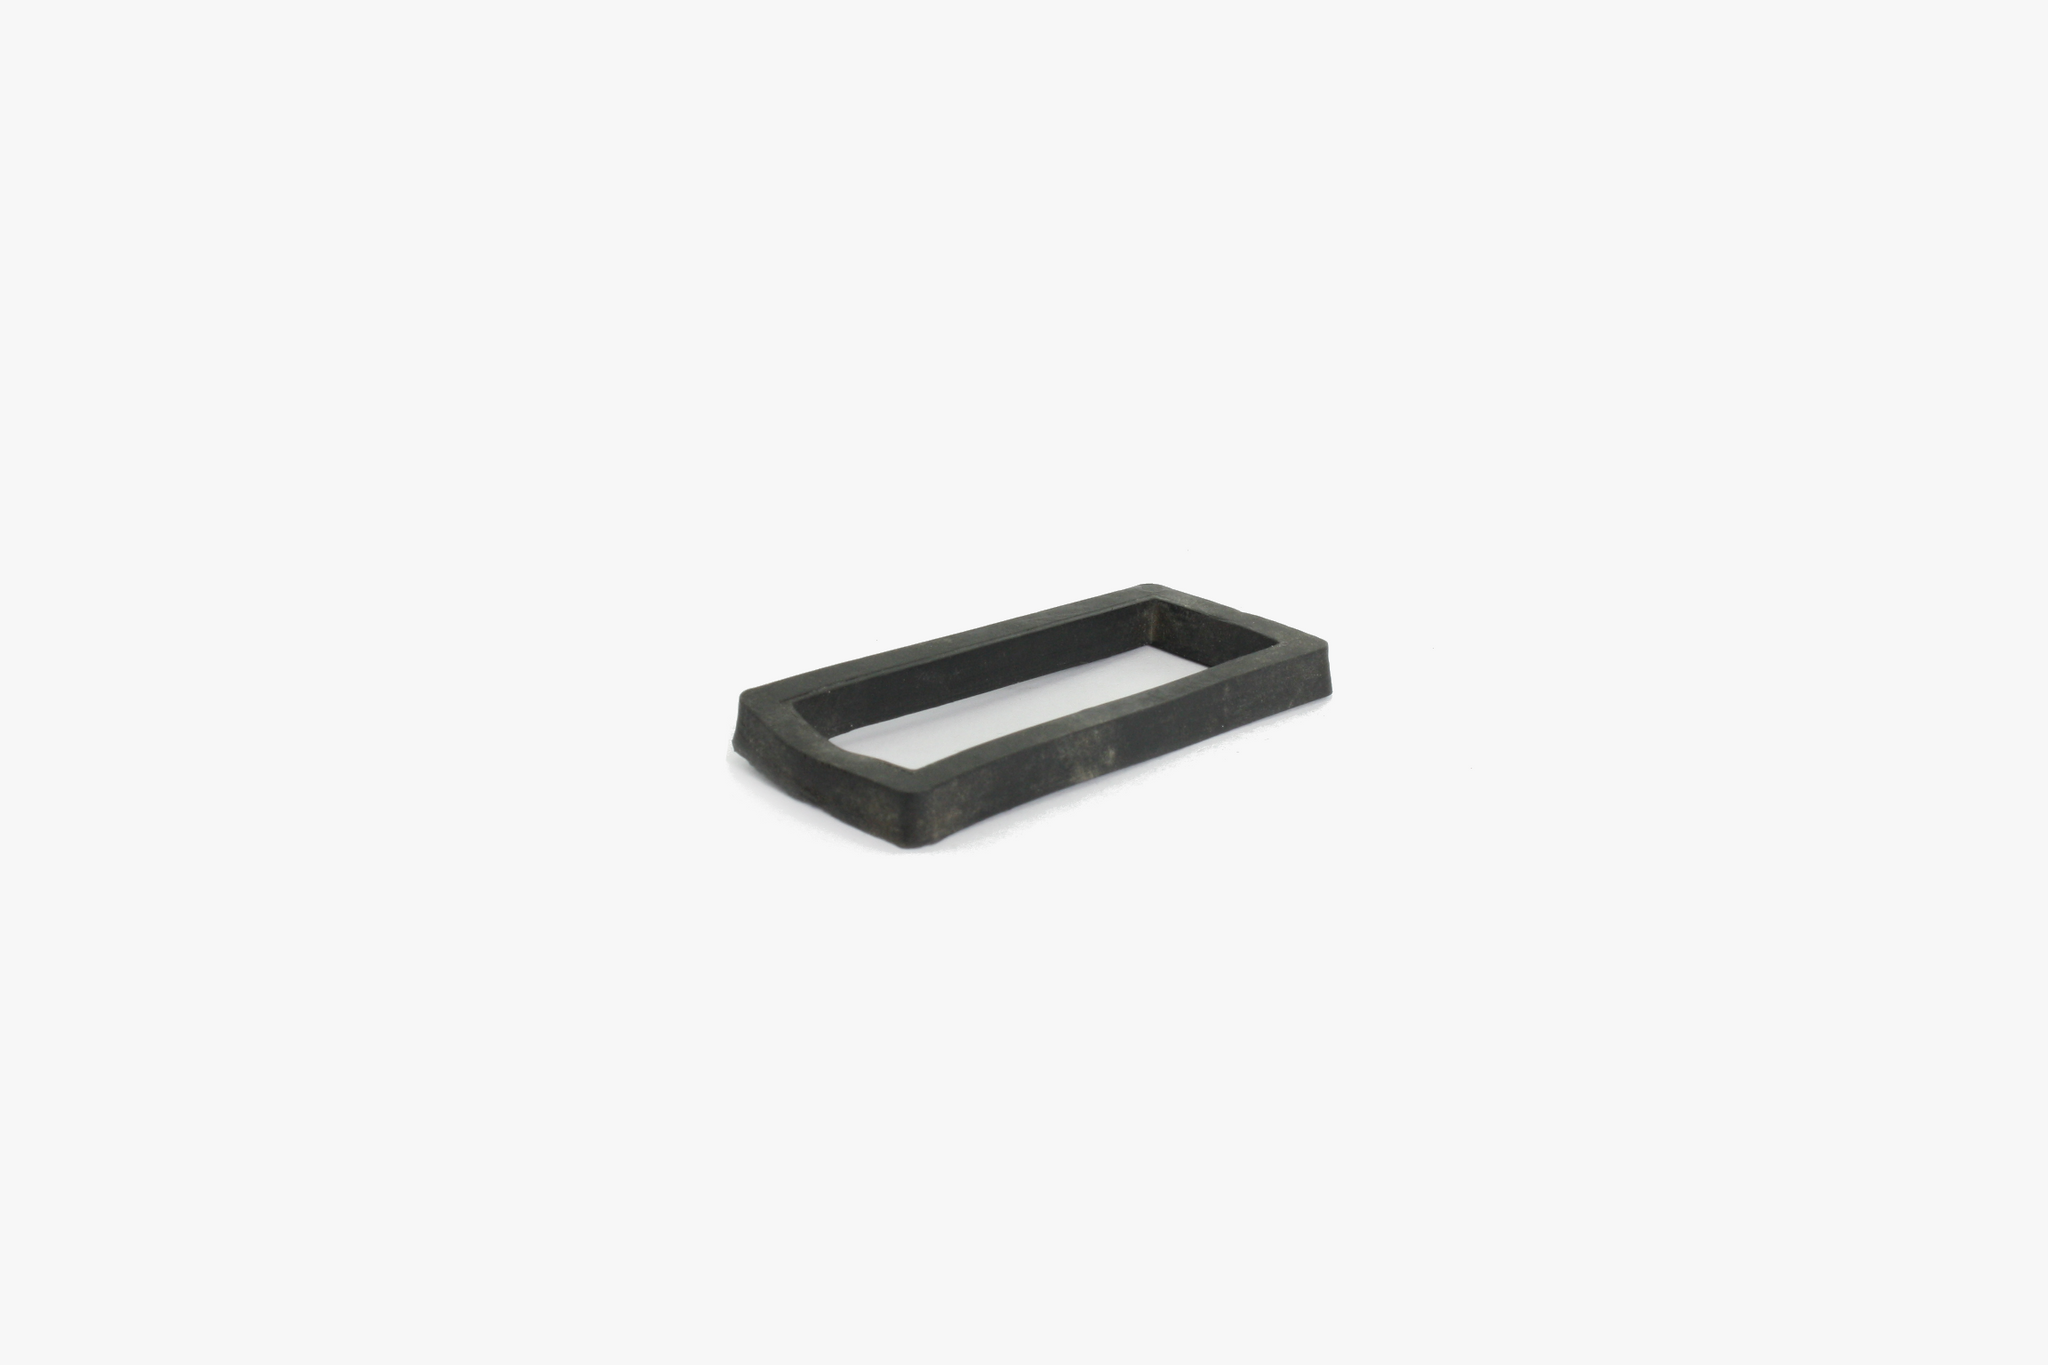 2 1/8" square glass clamp 6mm gaskets